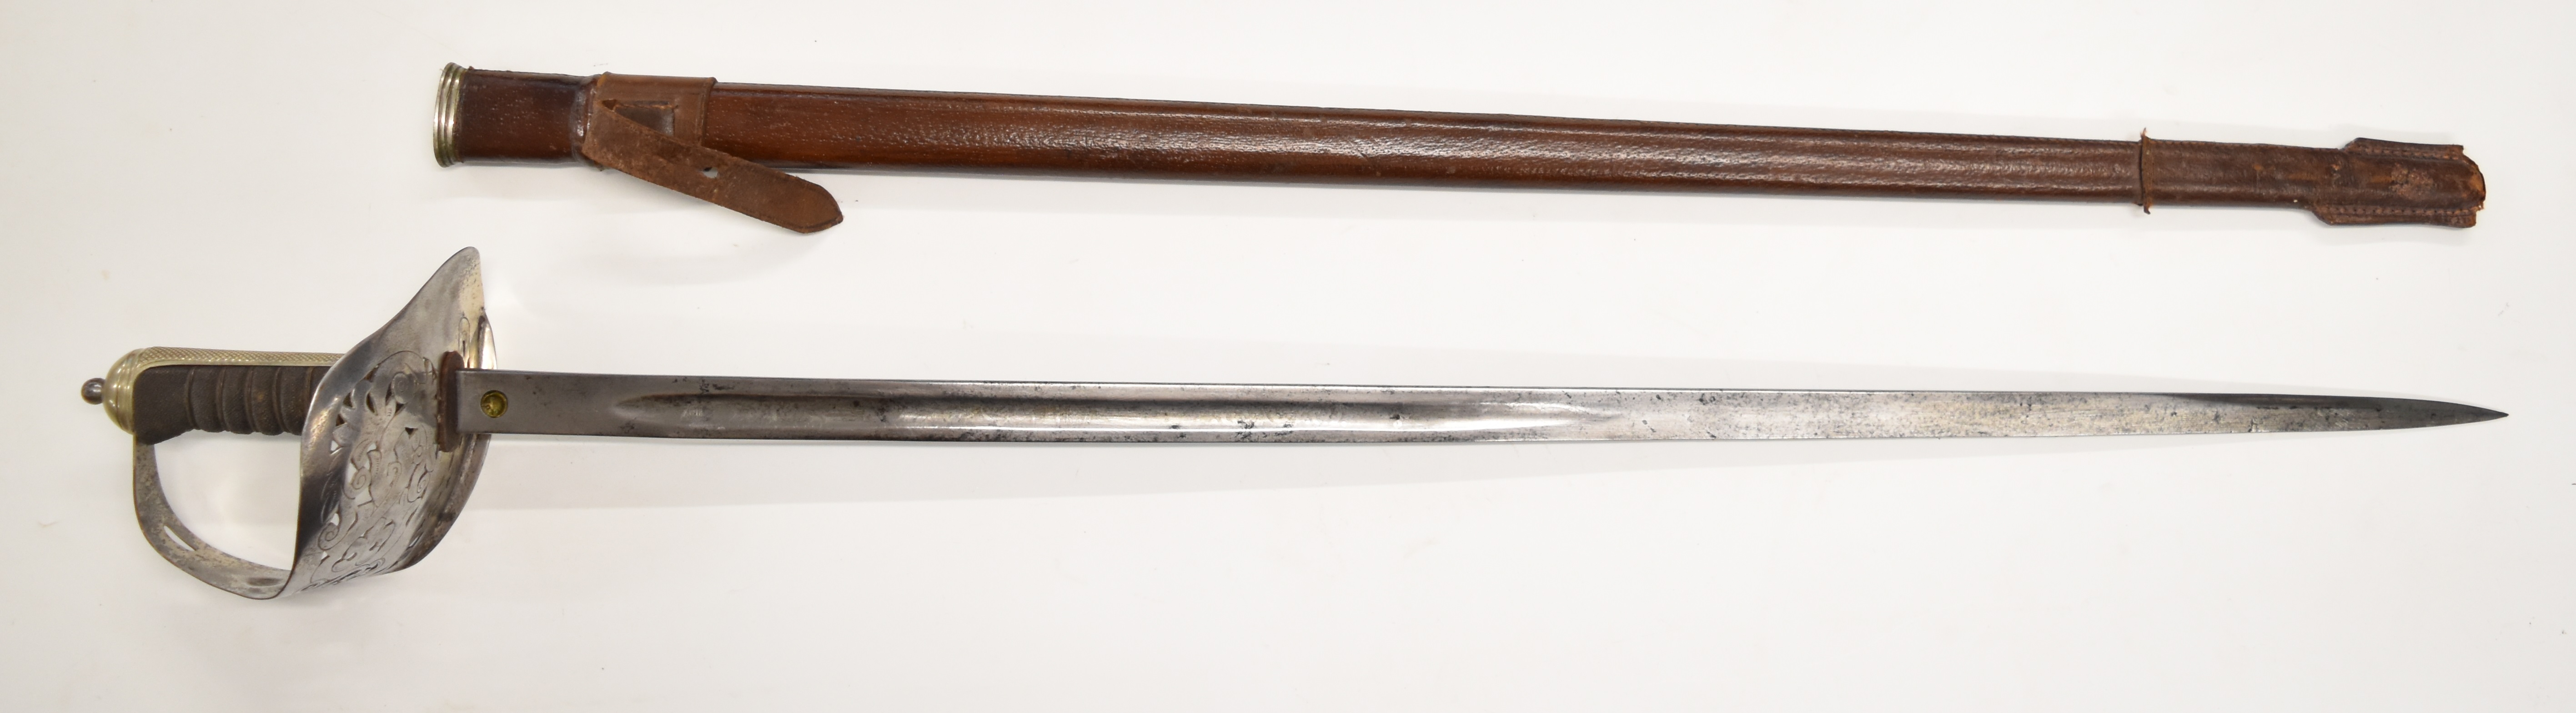 British Army 1897 pattern officer's sword with George V cypher to guard, 82cm part fullered blade - Image 2 of 9